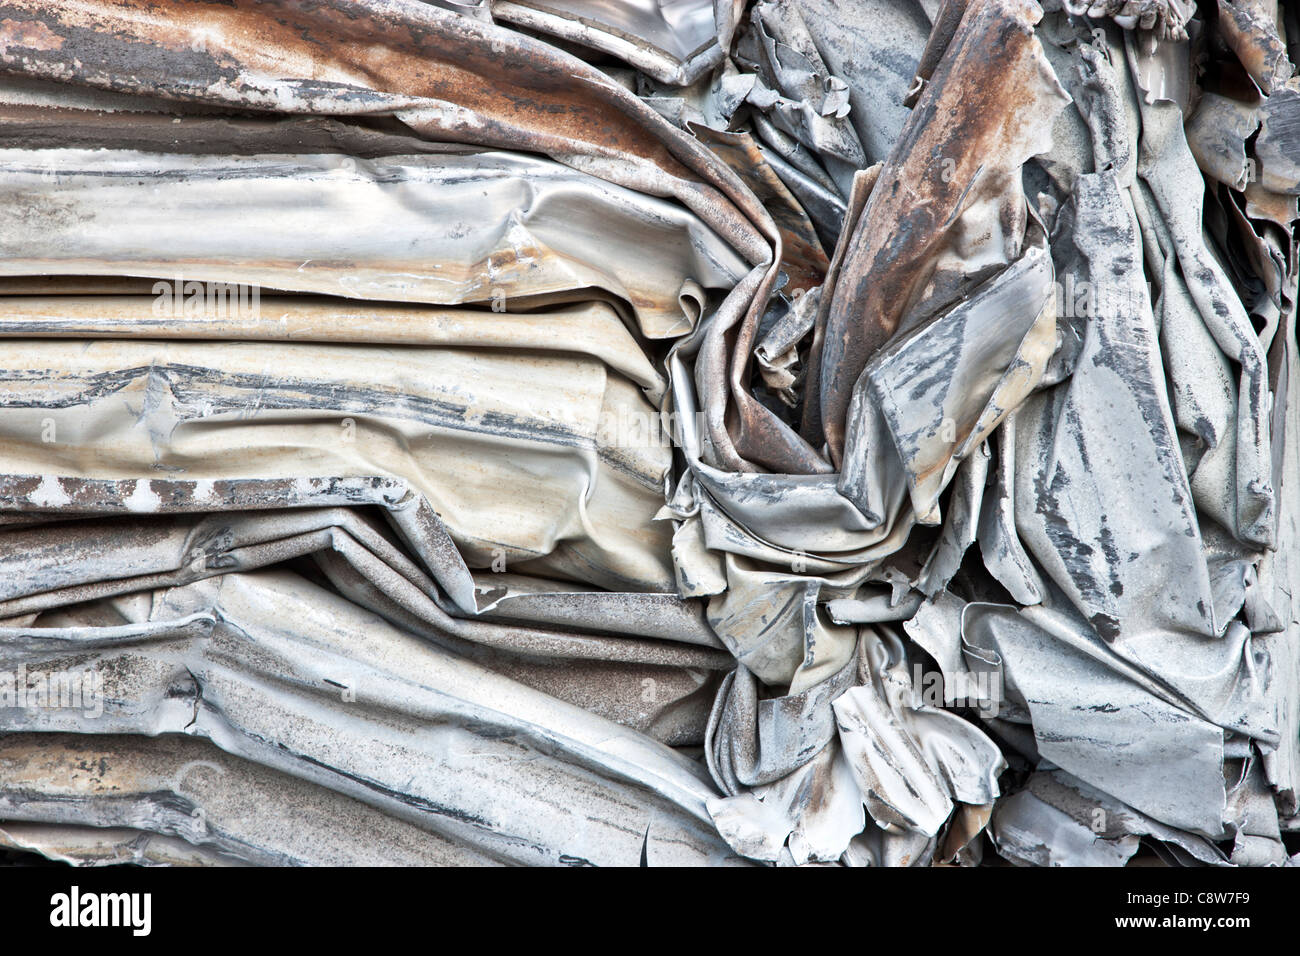 Recycling, compacted aluminum sheeting. Stock Photo